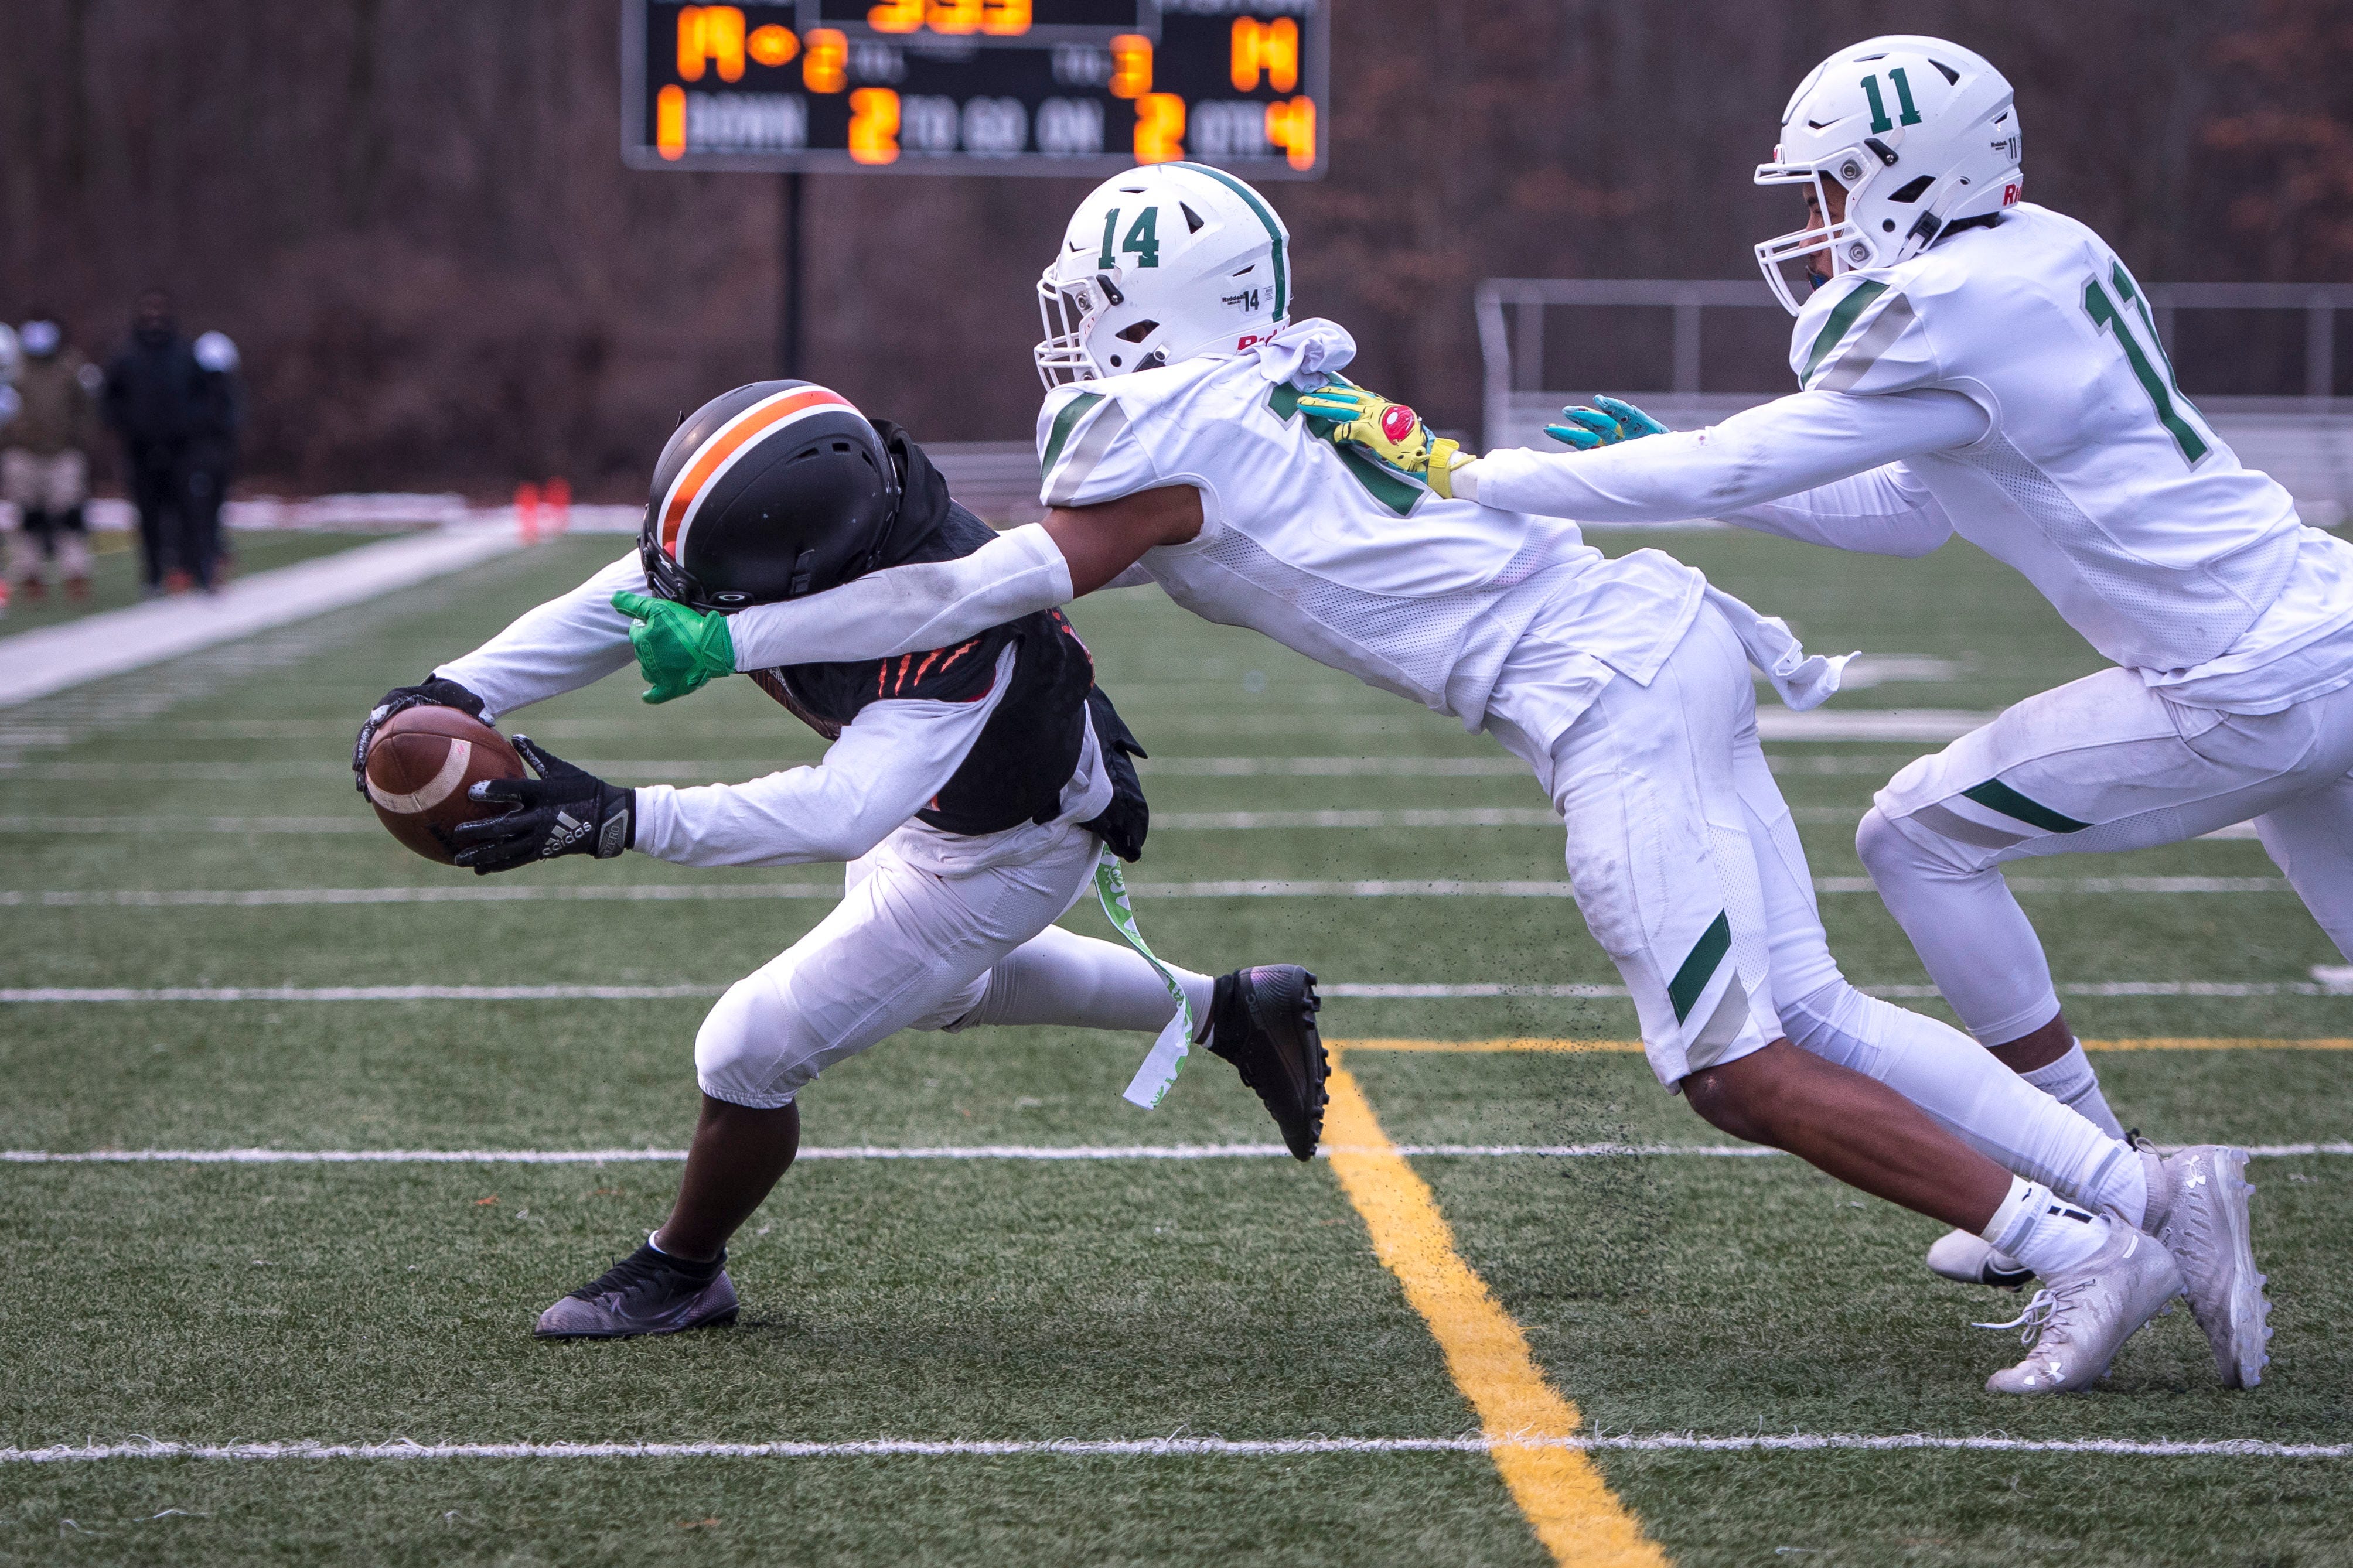 Belleville freshman wide receiver Kevin Simes (9) scores a touchdown against West Bloomfield senior defensive back Grant Lenton (14) and senior free safety Gavin Hardeman (11) during the fourth quarter.